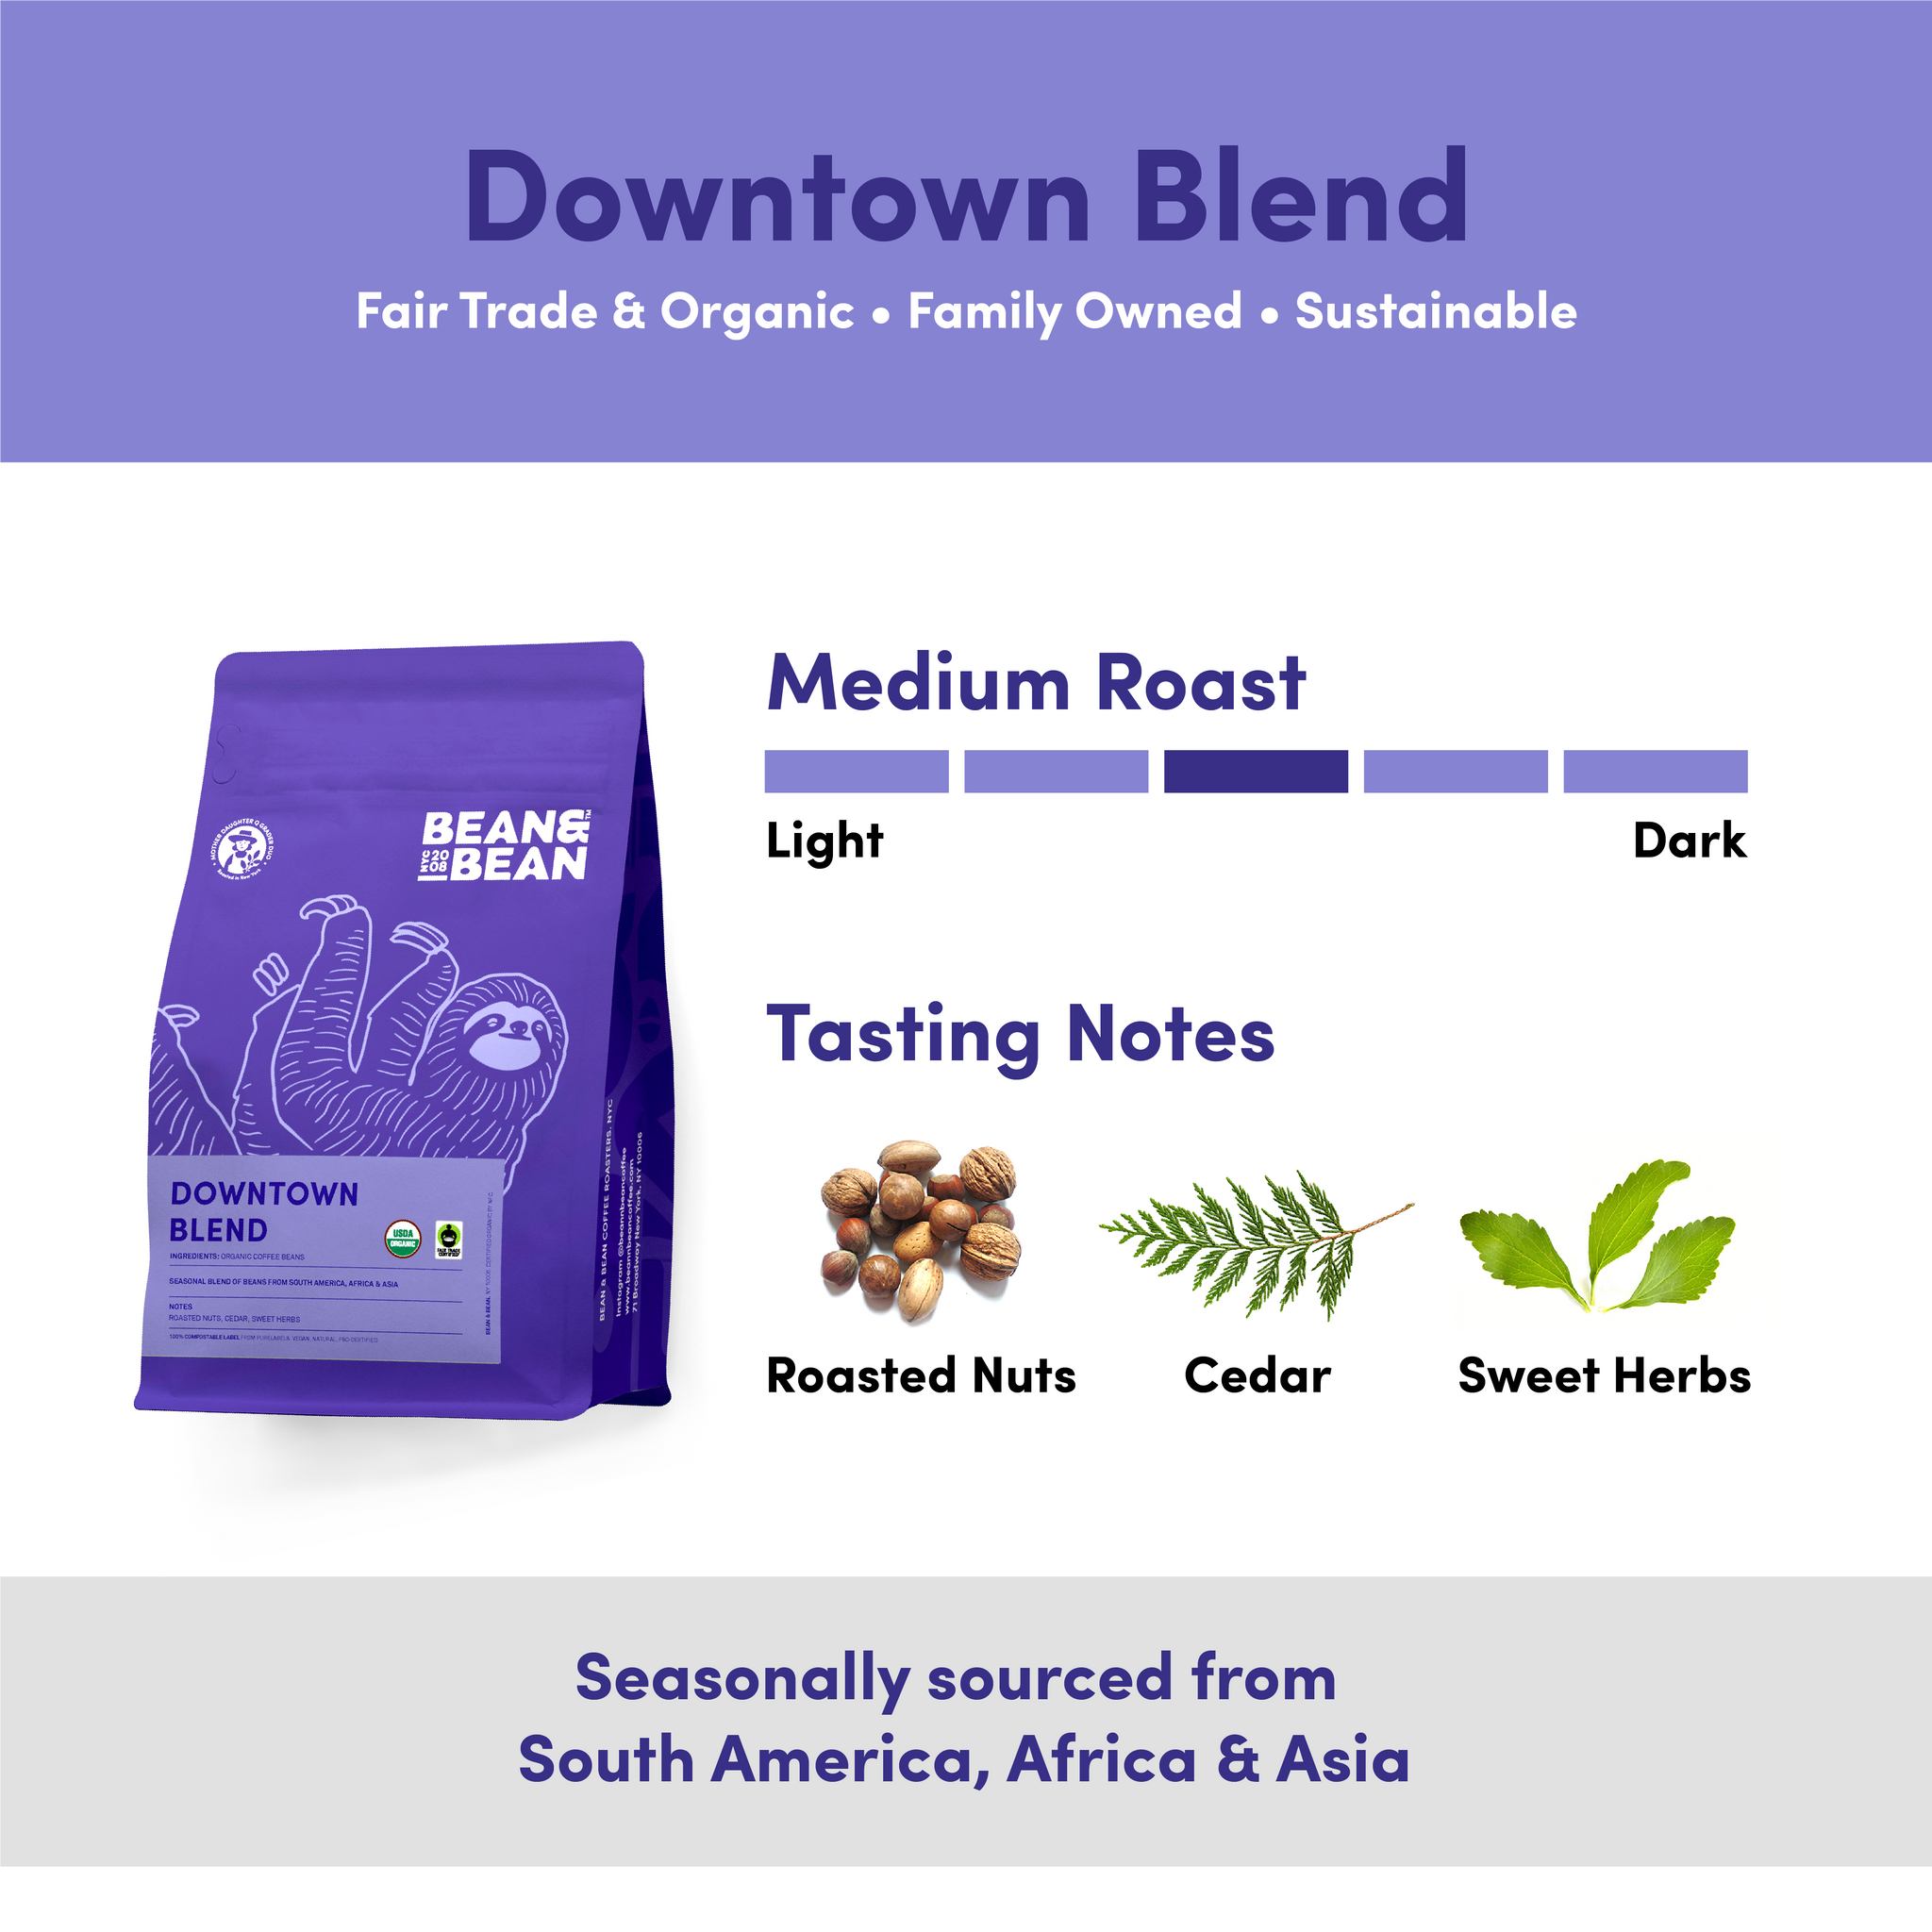 An infographic for Downtown Blend coffee, showing the packaging, roast level, tasting notes, and regions sourced from